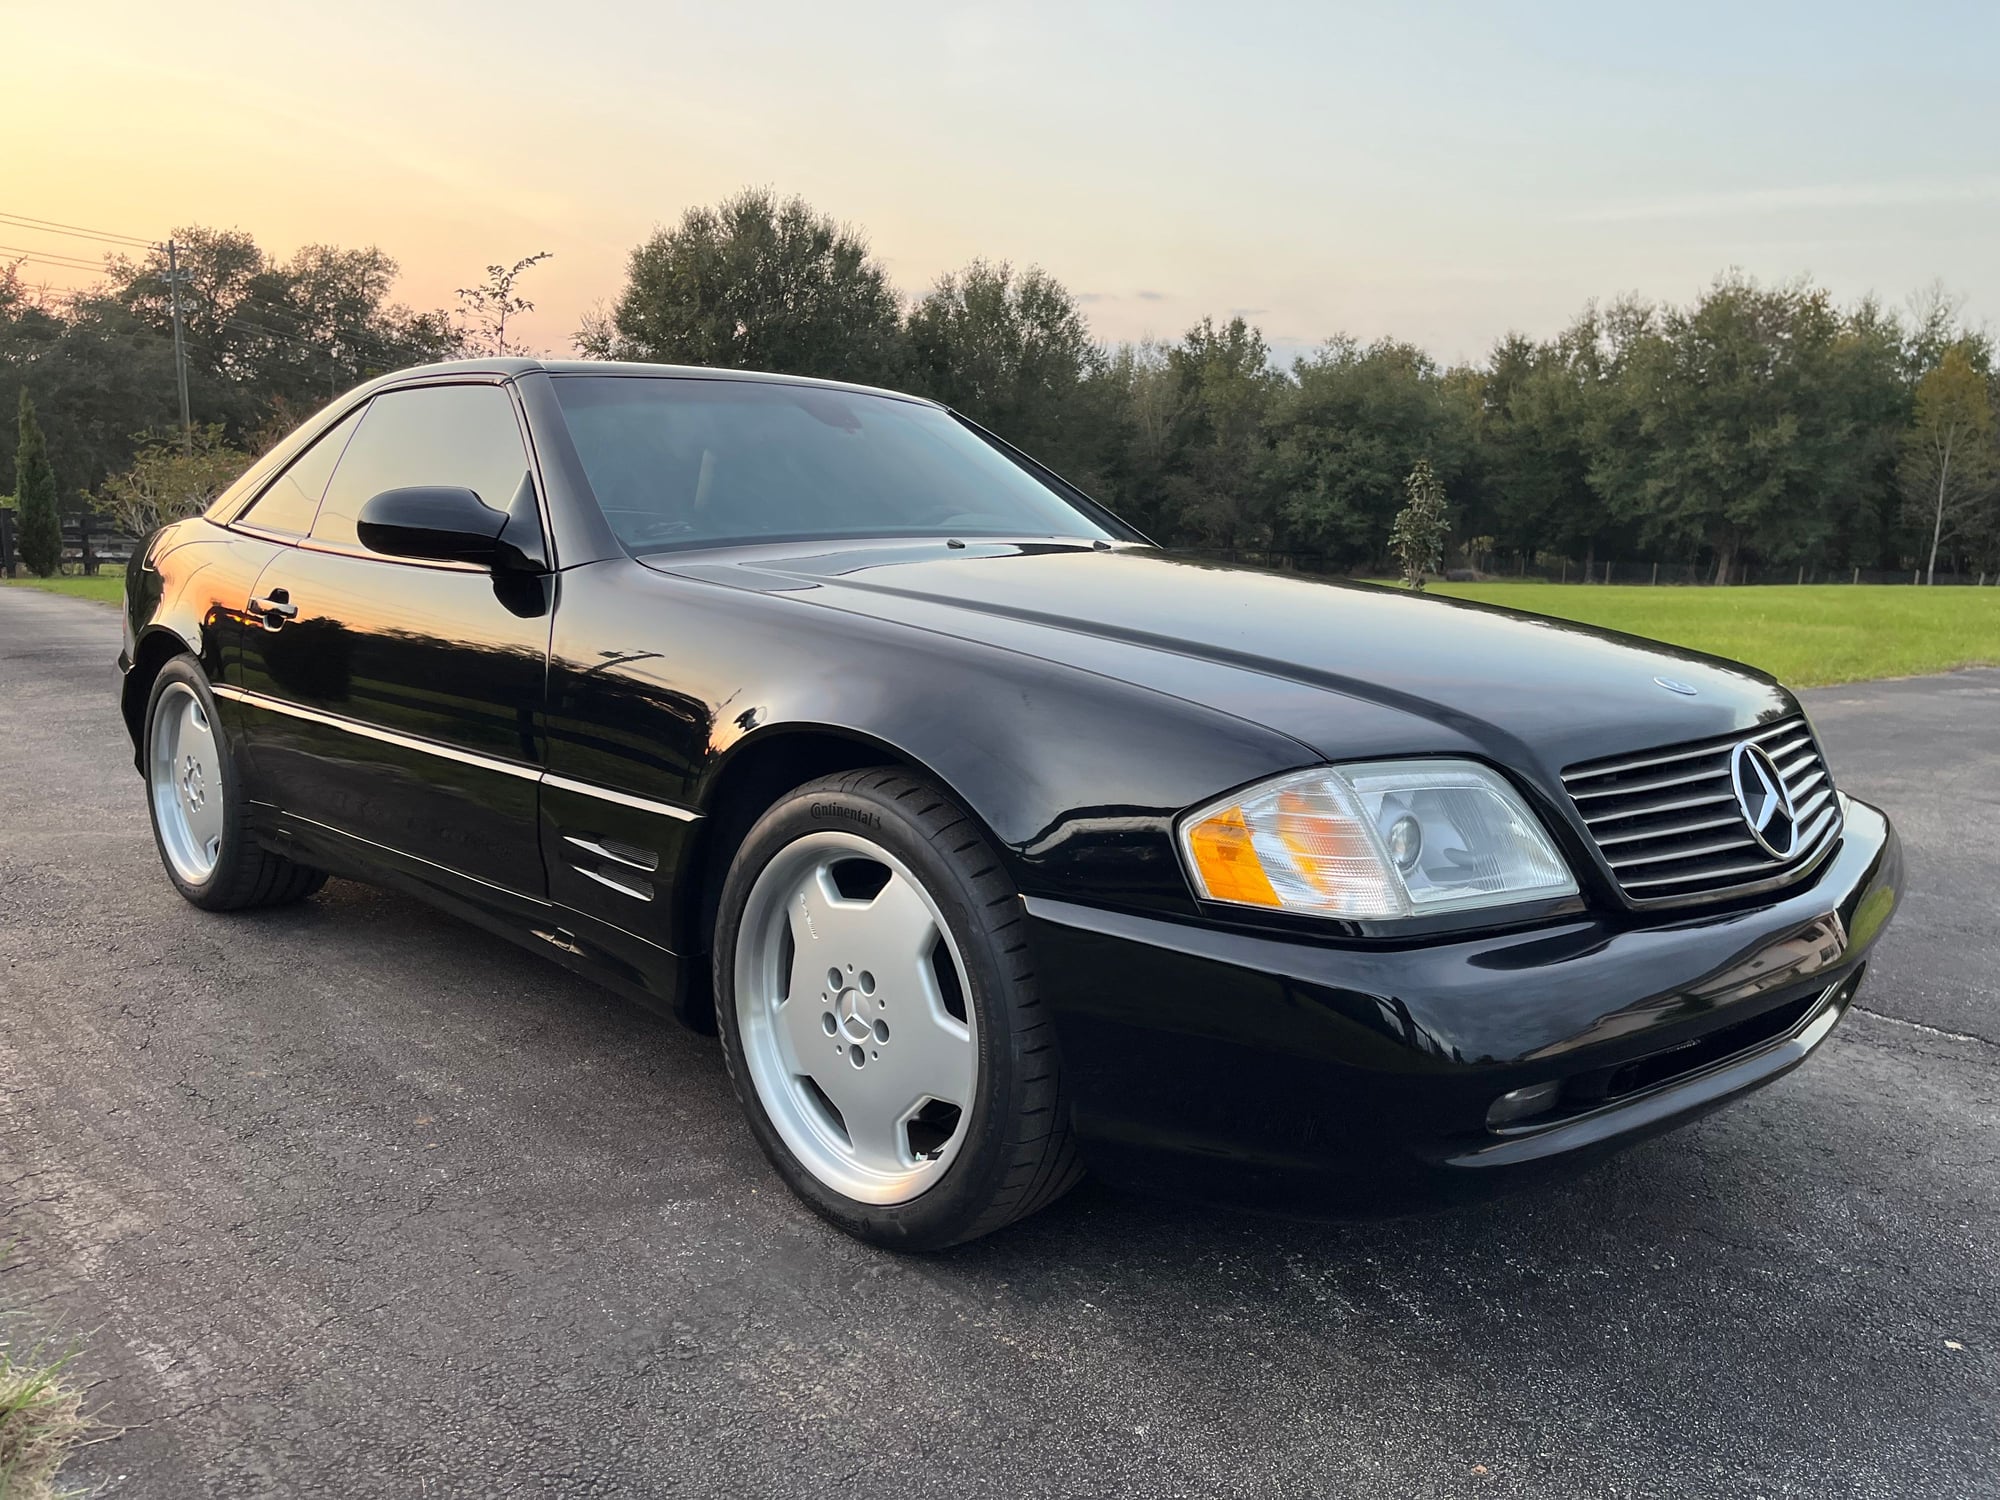 2001 Mercedes-Benz SL500 - 2001 SL500 AMG Styling Package - Used - VIN WDBFA68F41F198503 - 114,400 Miles - 8 cyl - 2WD - Automatic - Convertible - Black - Howey In The Hills, FL 34737, United States